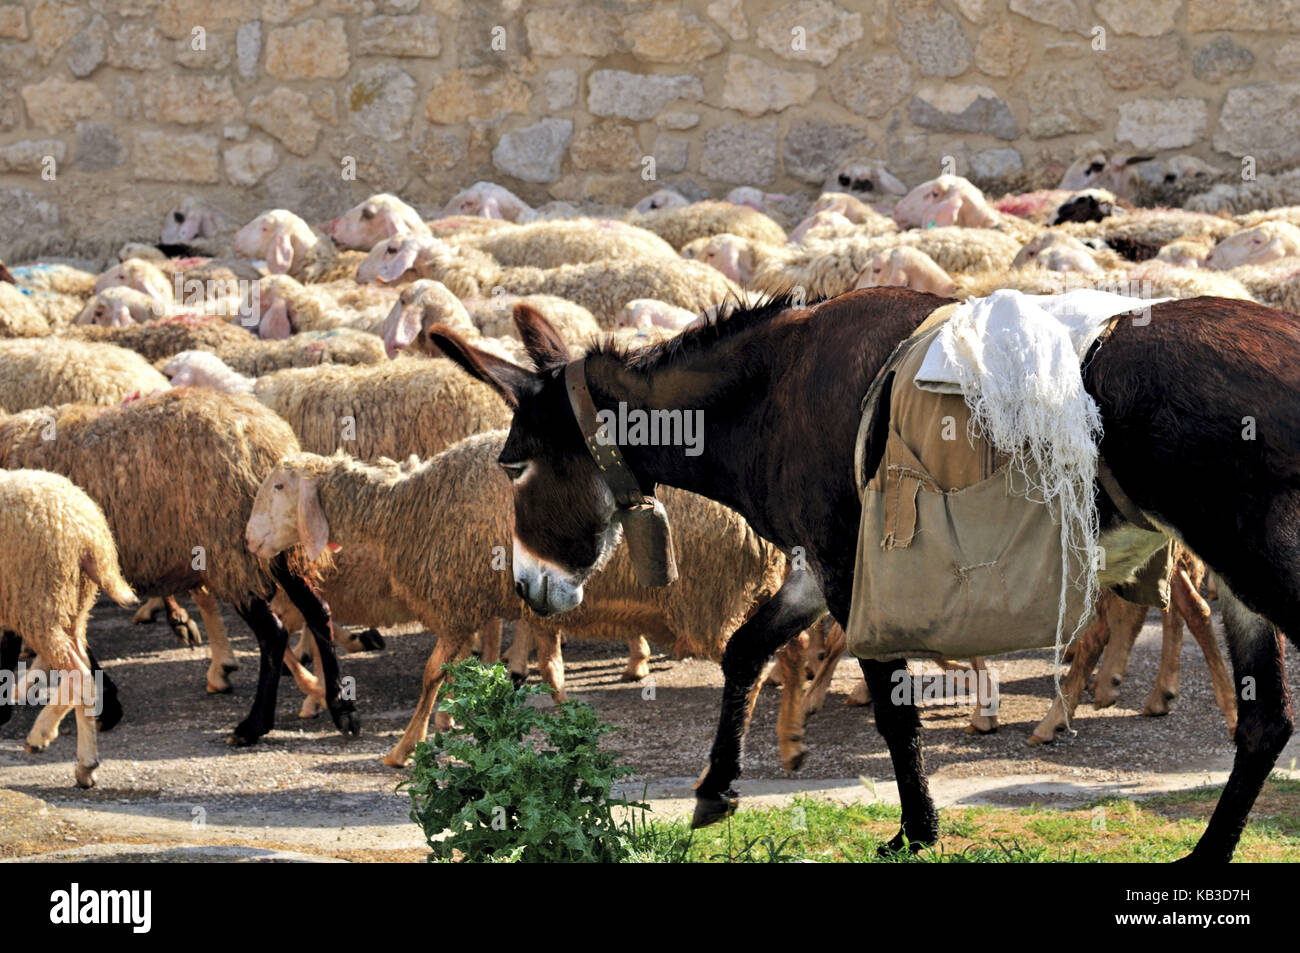 Spain, Way of St. James, flock of sheep and donkey in Castrojerez, Stock Photo